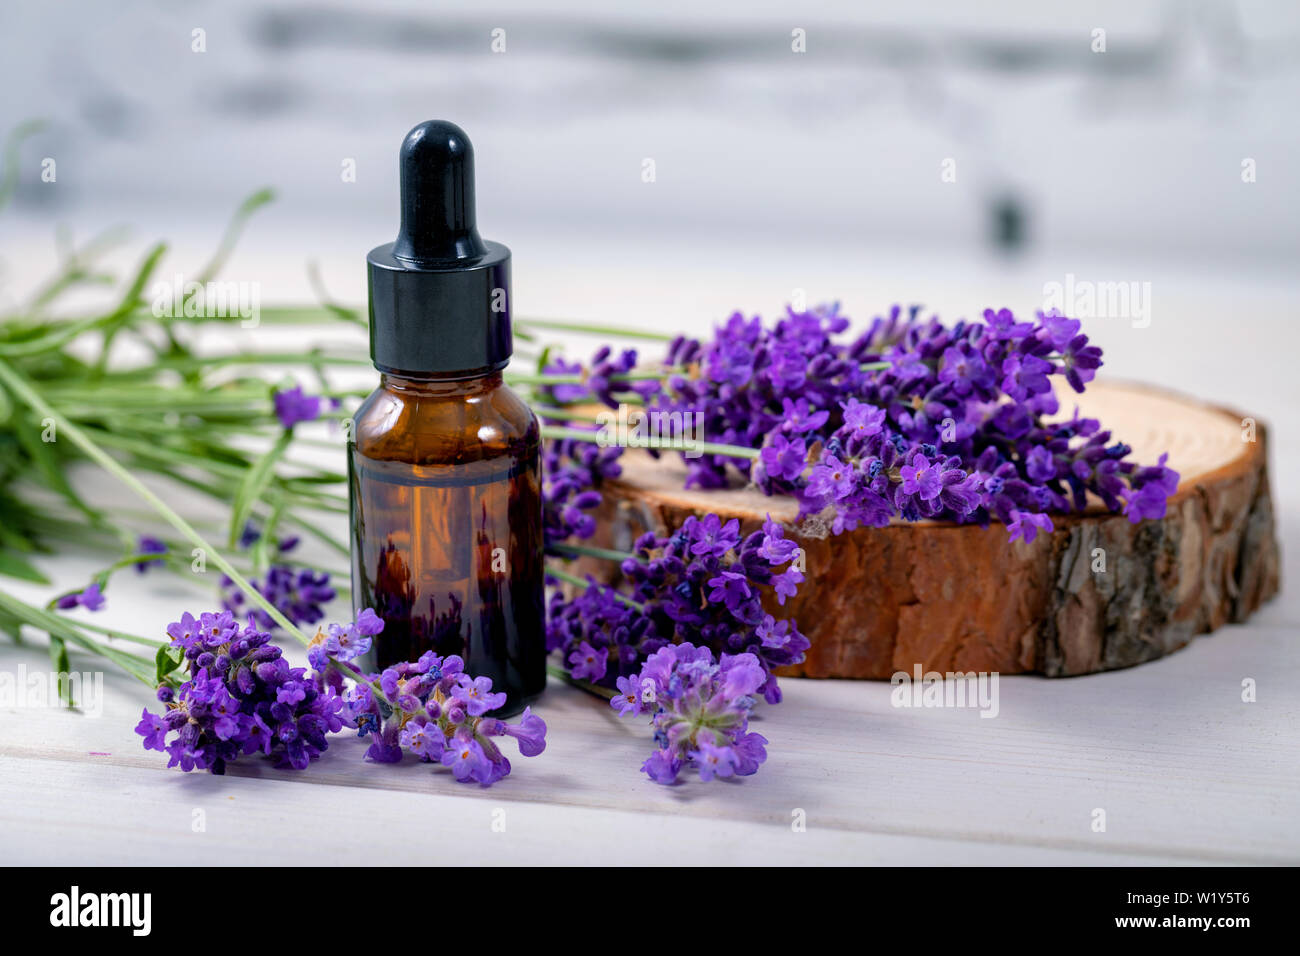 lavender herbal oil and flowers on wooden background Stock Photo